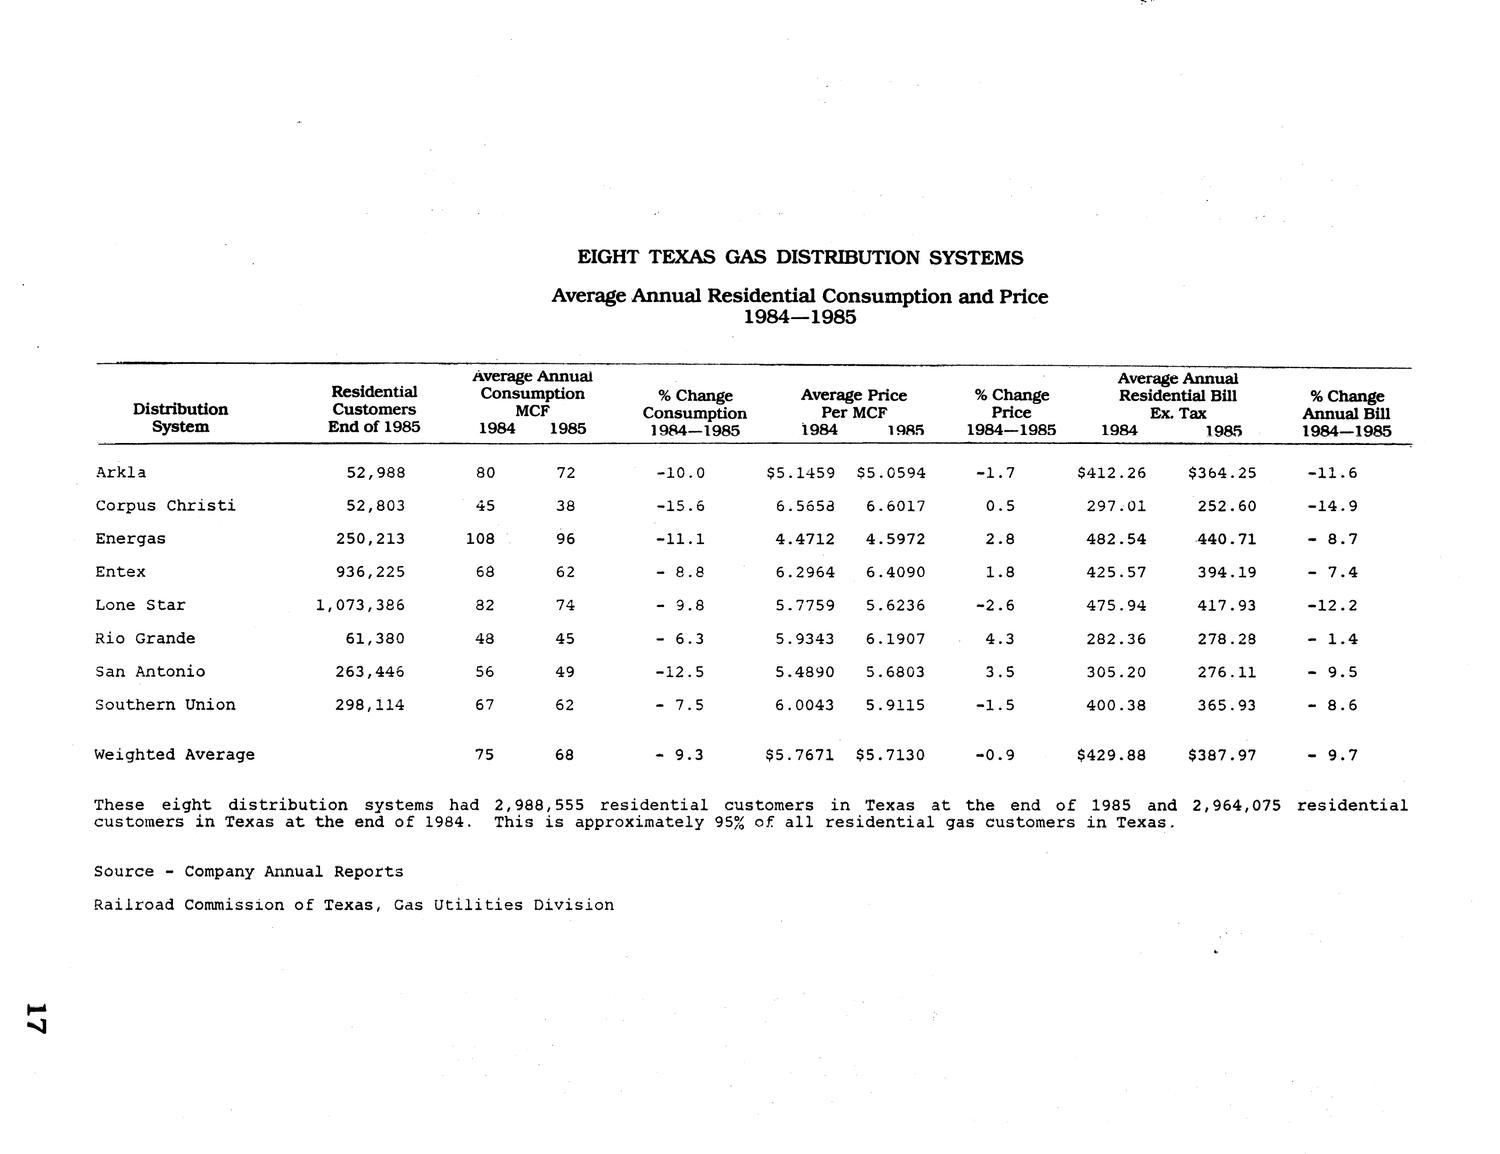 Railroad Commission of Texas Transportation/Gas Utilities Division Annual Report: 1986
                                                
                                                    17
                                                